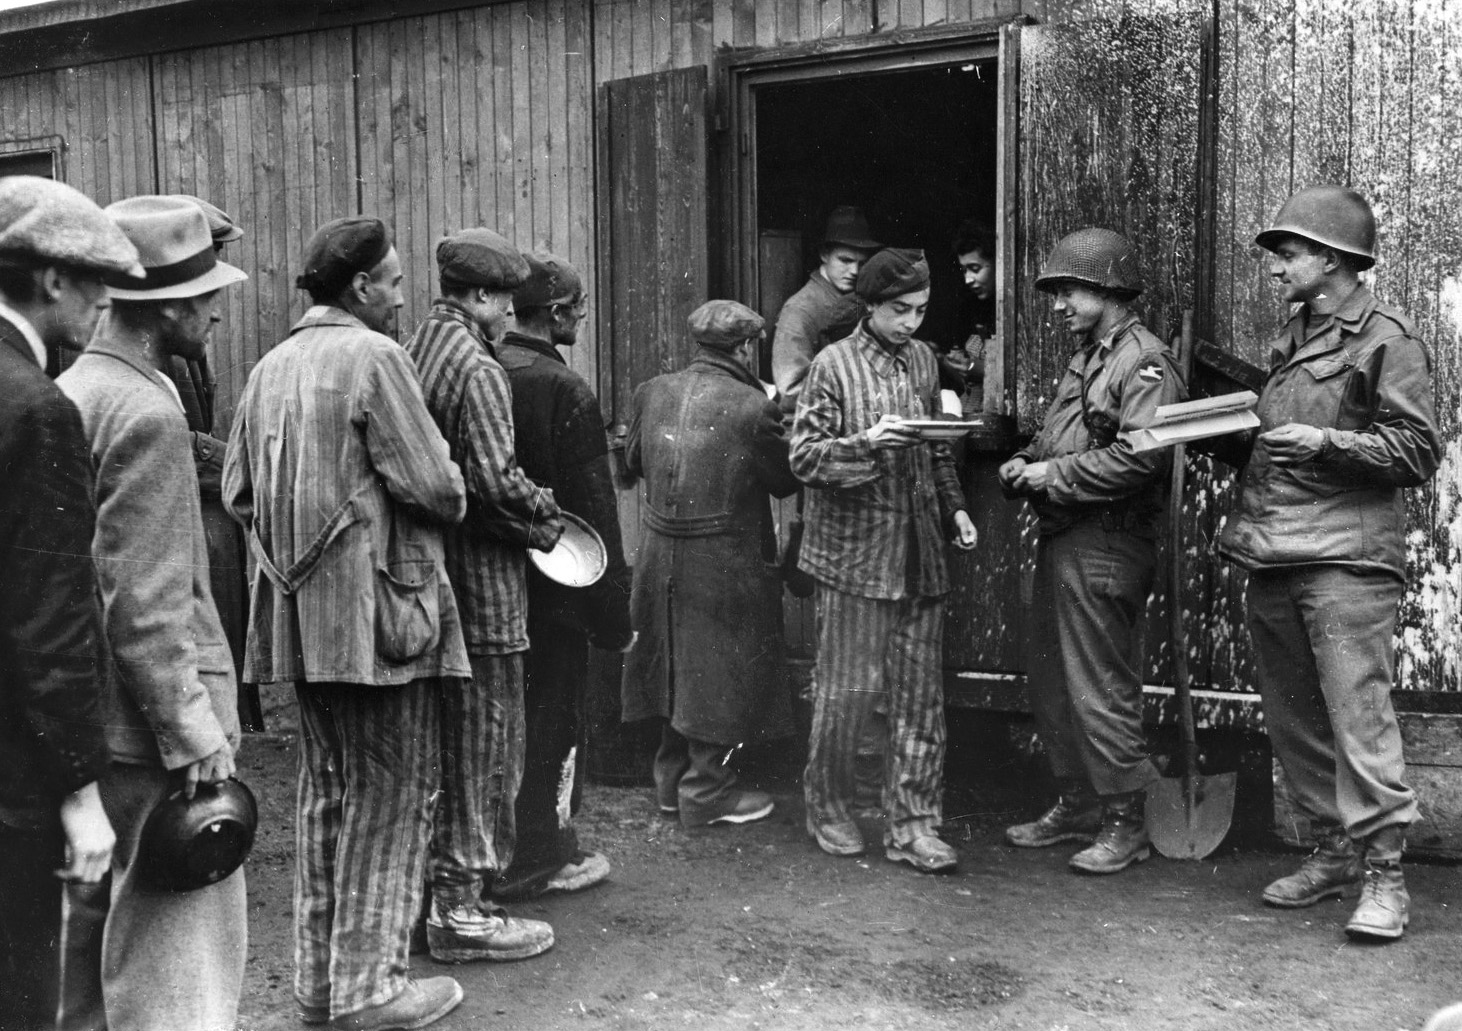 Newly liberated Polish prisoners of the Nazi concentration camp at Hanover-Ahlem queue up to receive rations of soup from American soldiers.